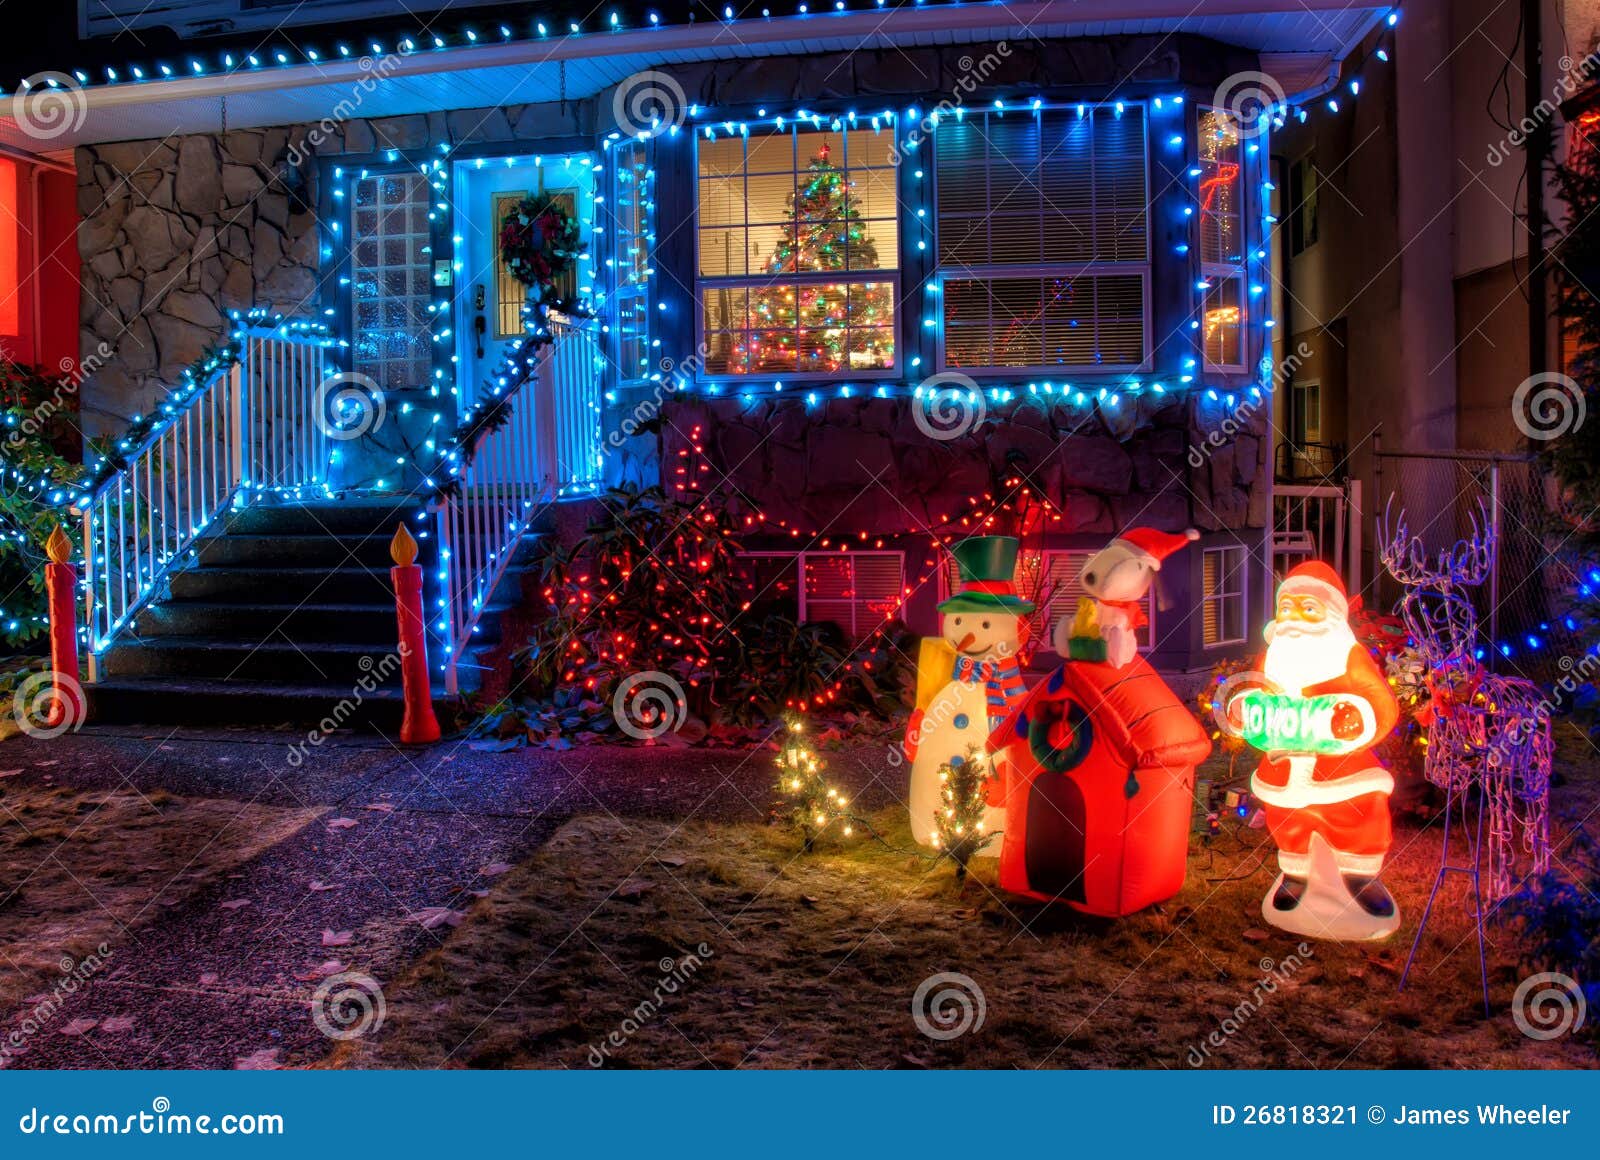 house decorated with christmas lights